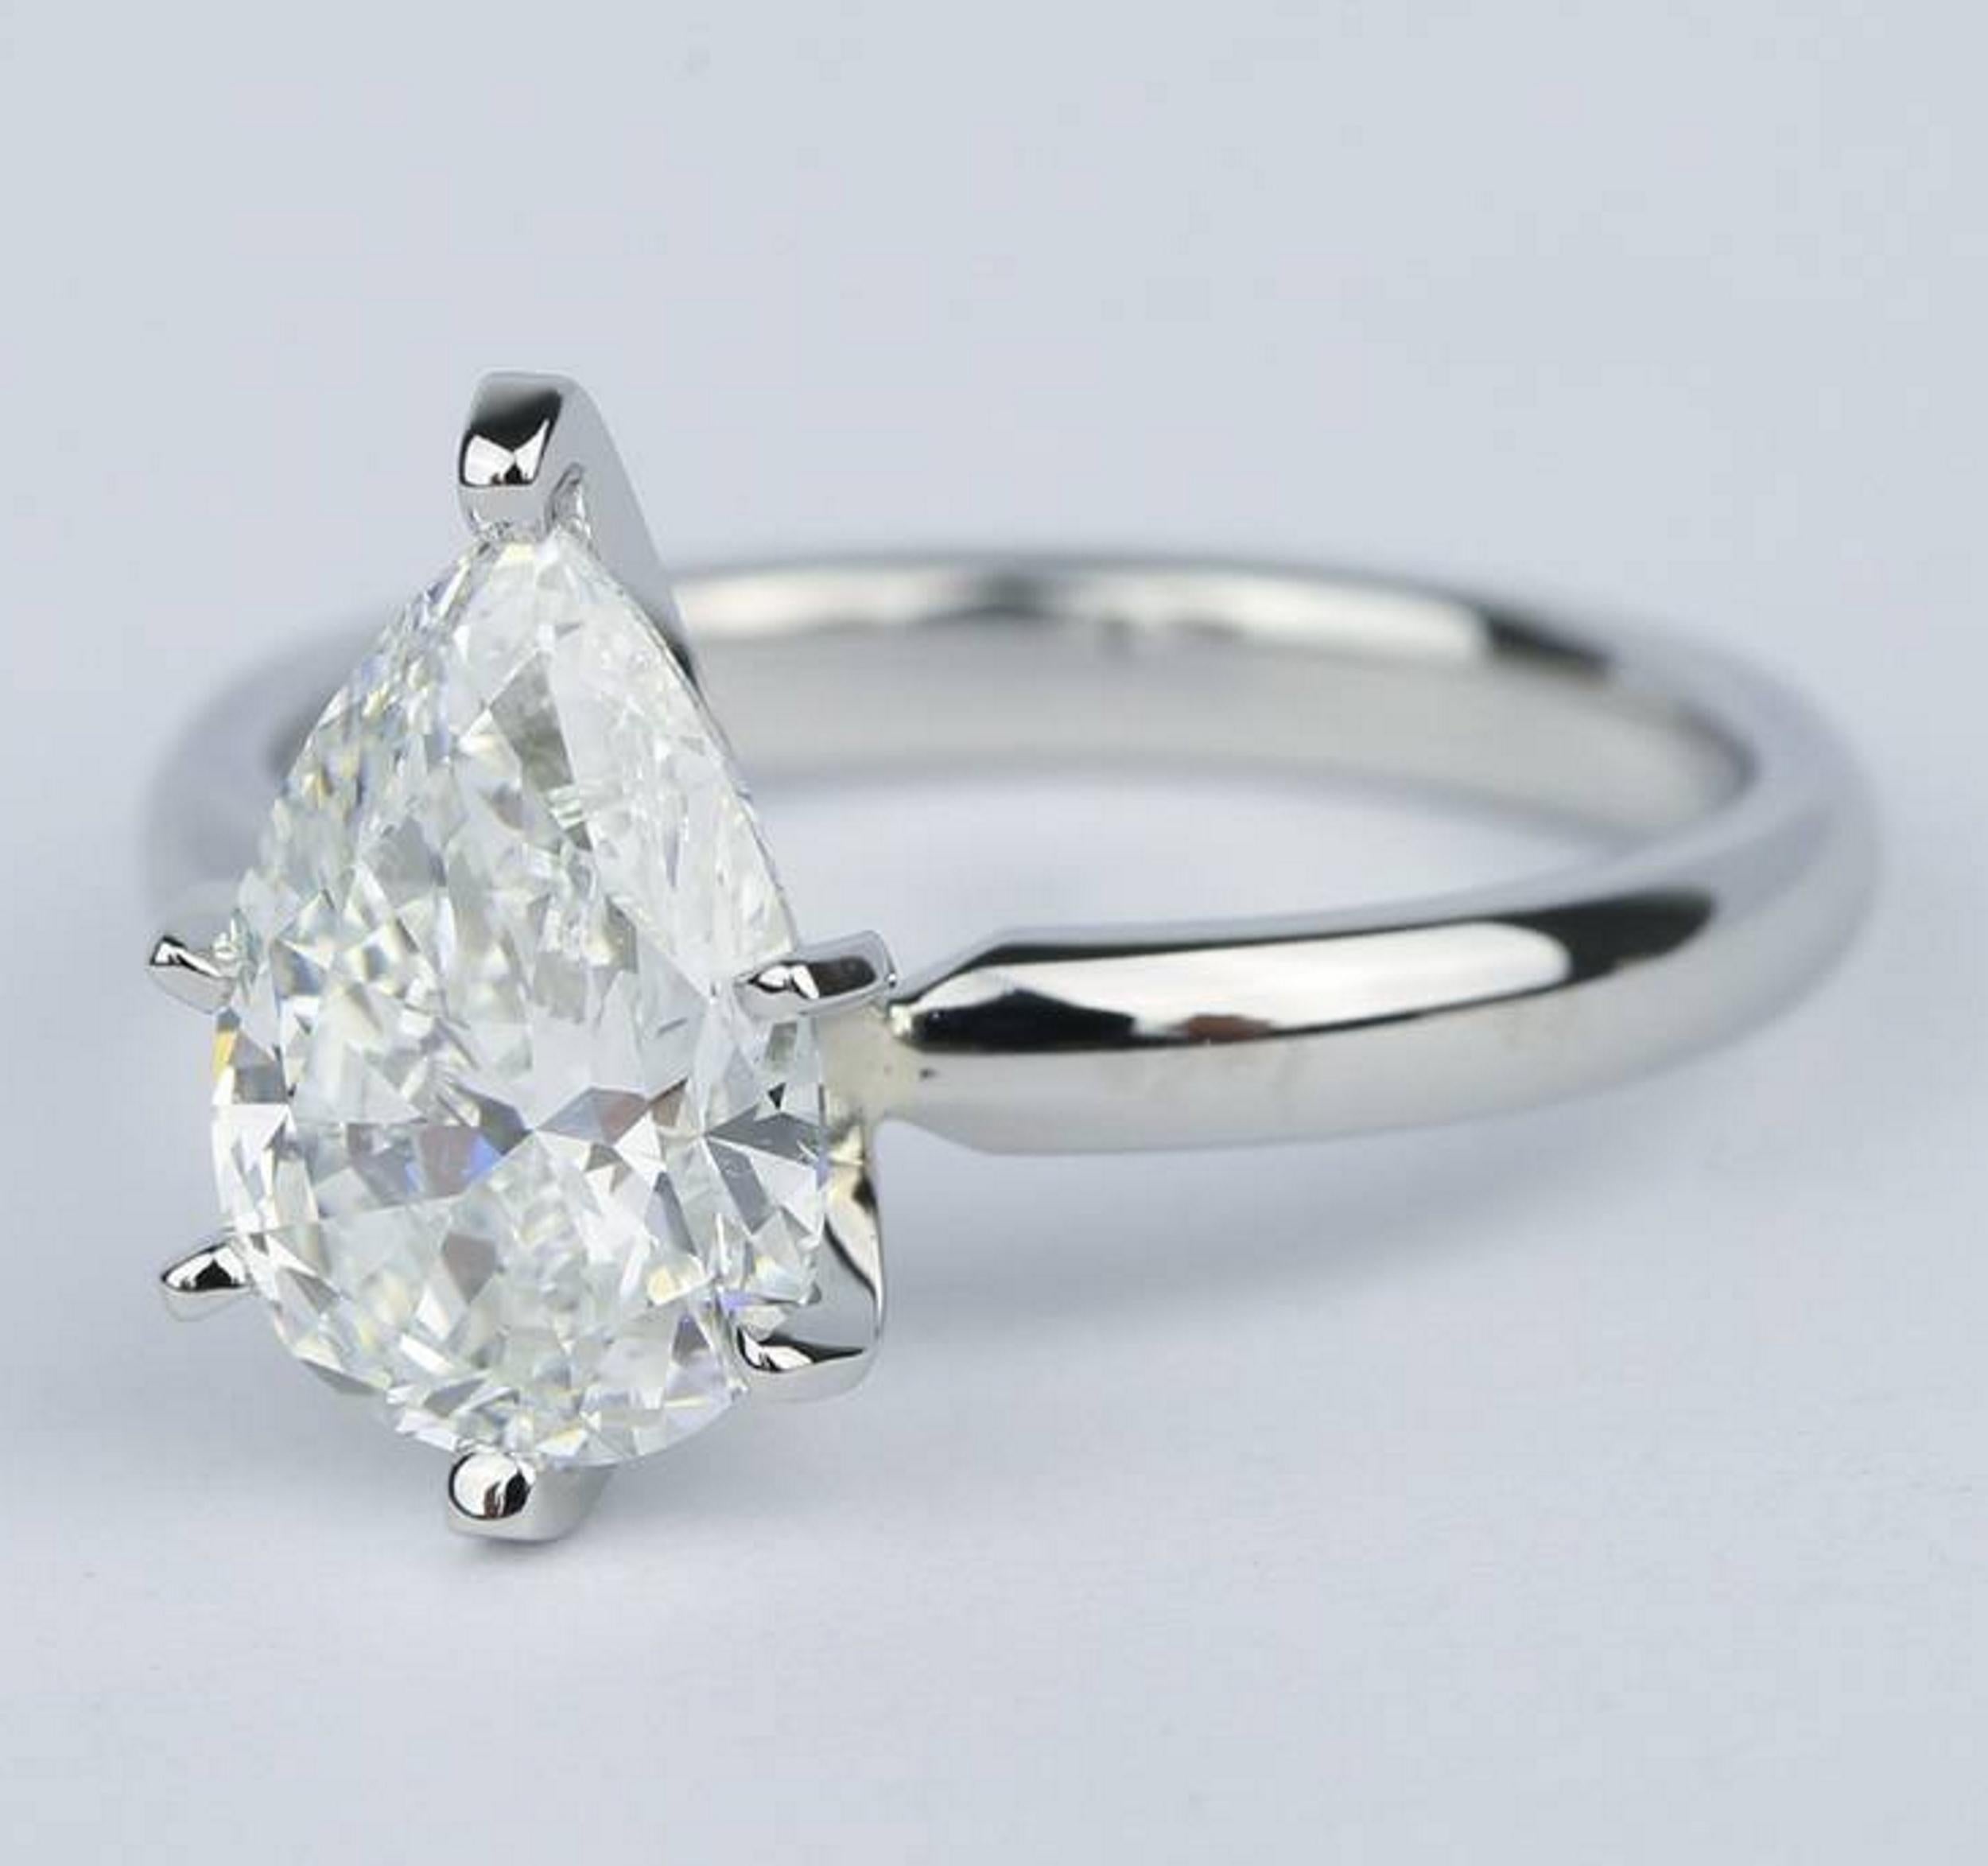 This sizeable 1.50 carat GIA certified pear cut diamond offers vibrant sparkle, a completely eye clean appearance, bright white D color, and a glamorous cut. The diamond is certified by GIA, the world’s premier gemological authority. Graded D for